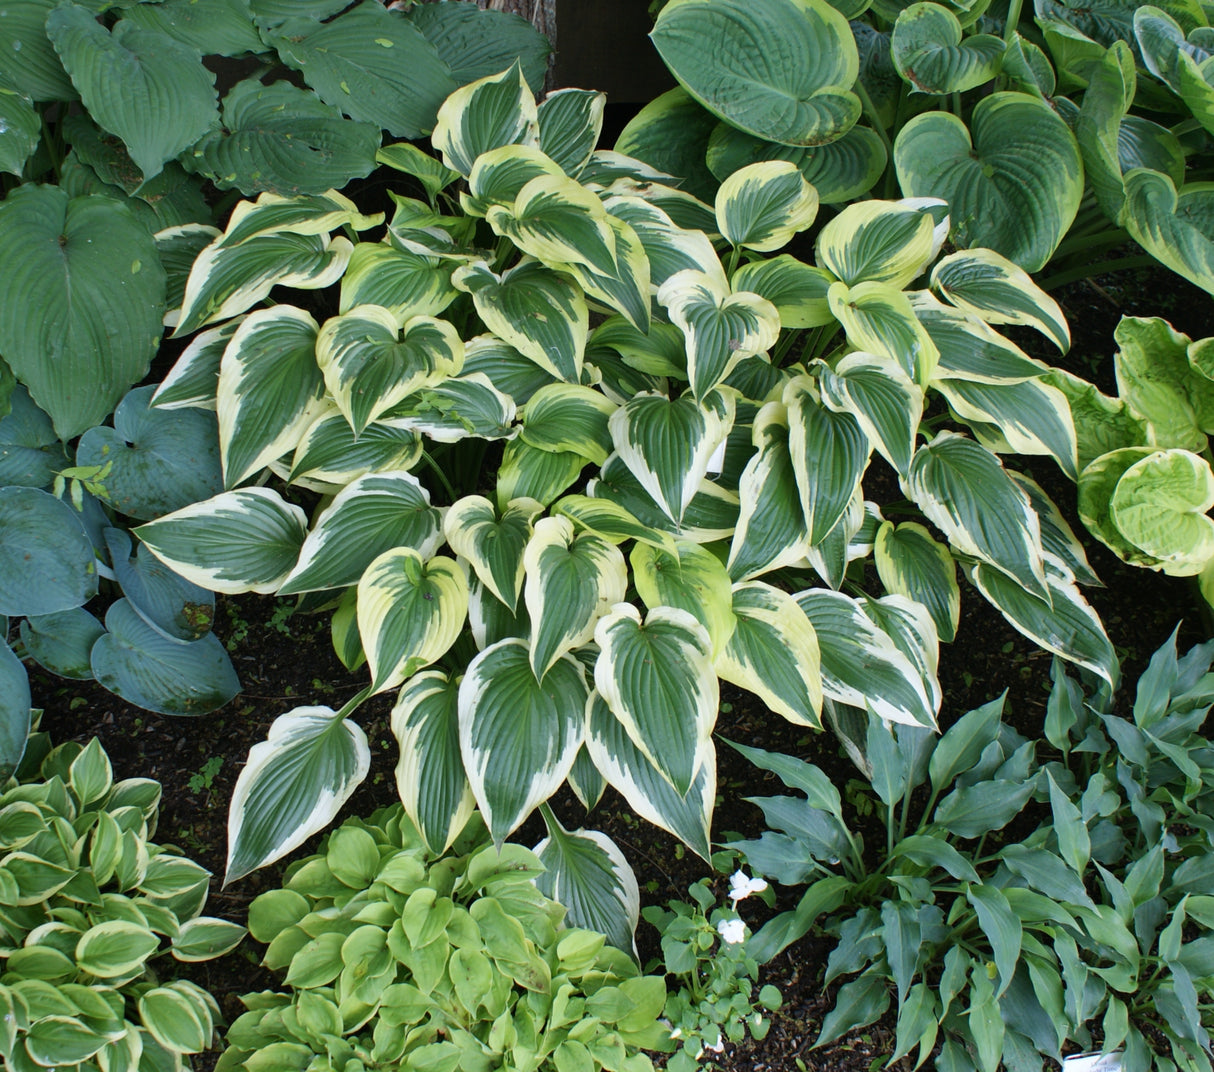 Fantabulous Hosta - 4.5 Inch Container